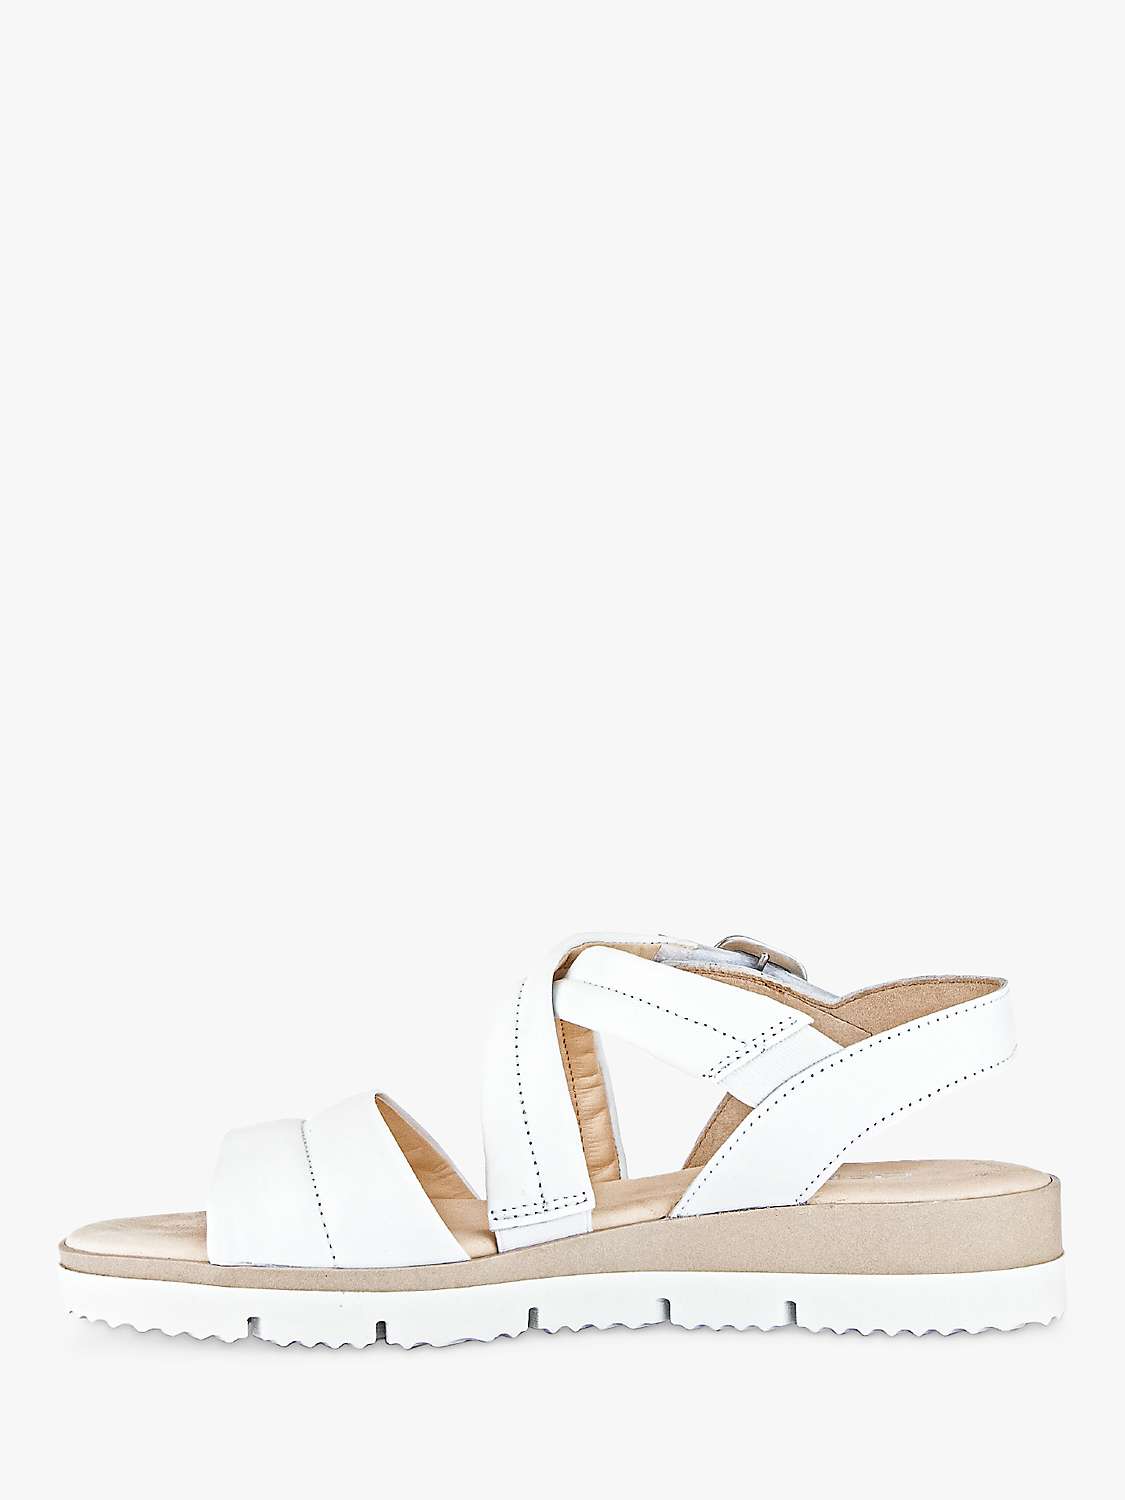 Buy Gabor Location Leather Open Toe Sandals, White Online at johnlewis.com